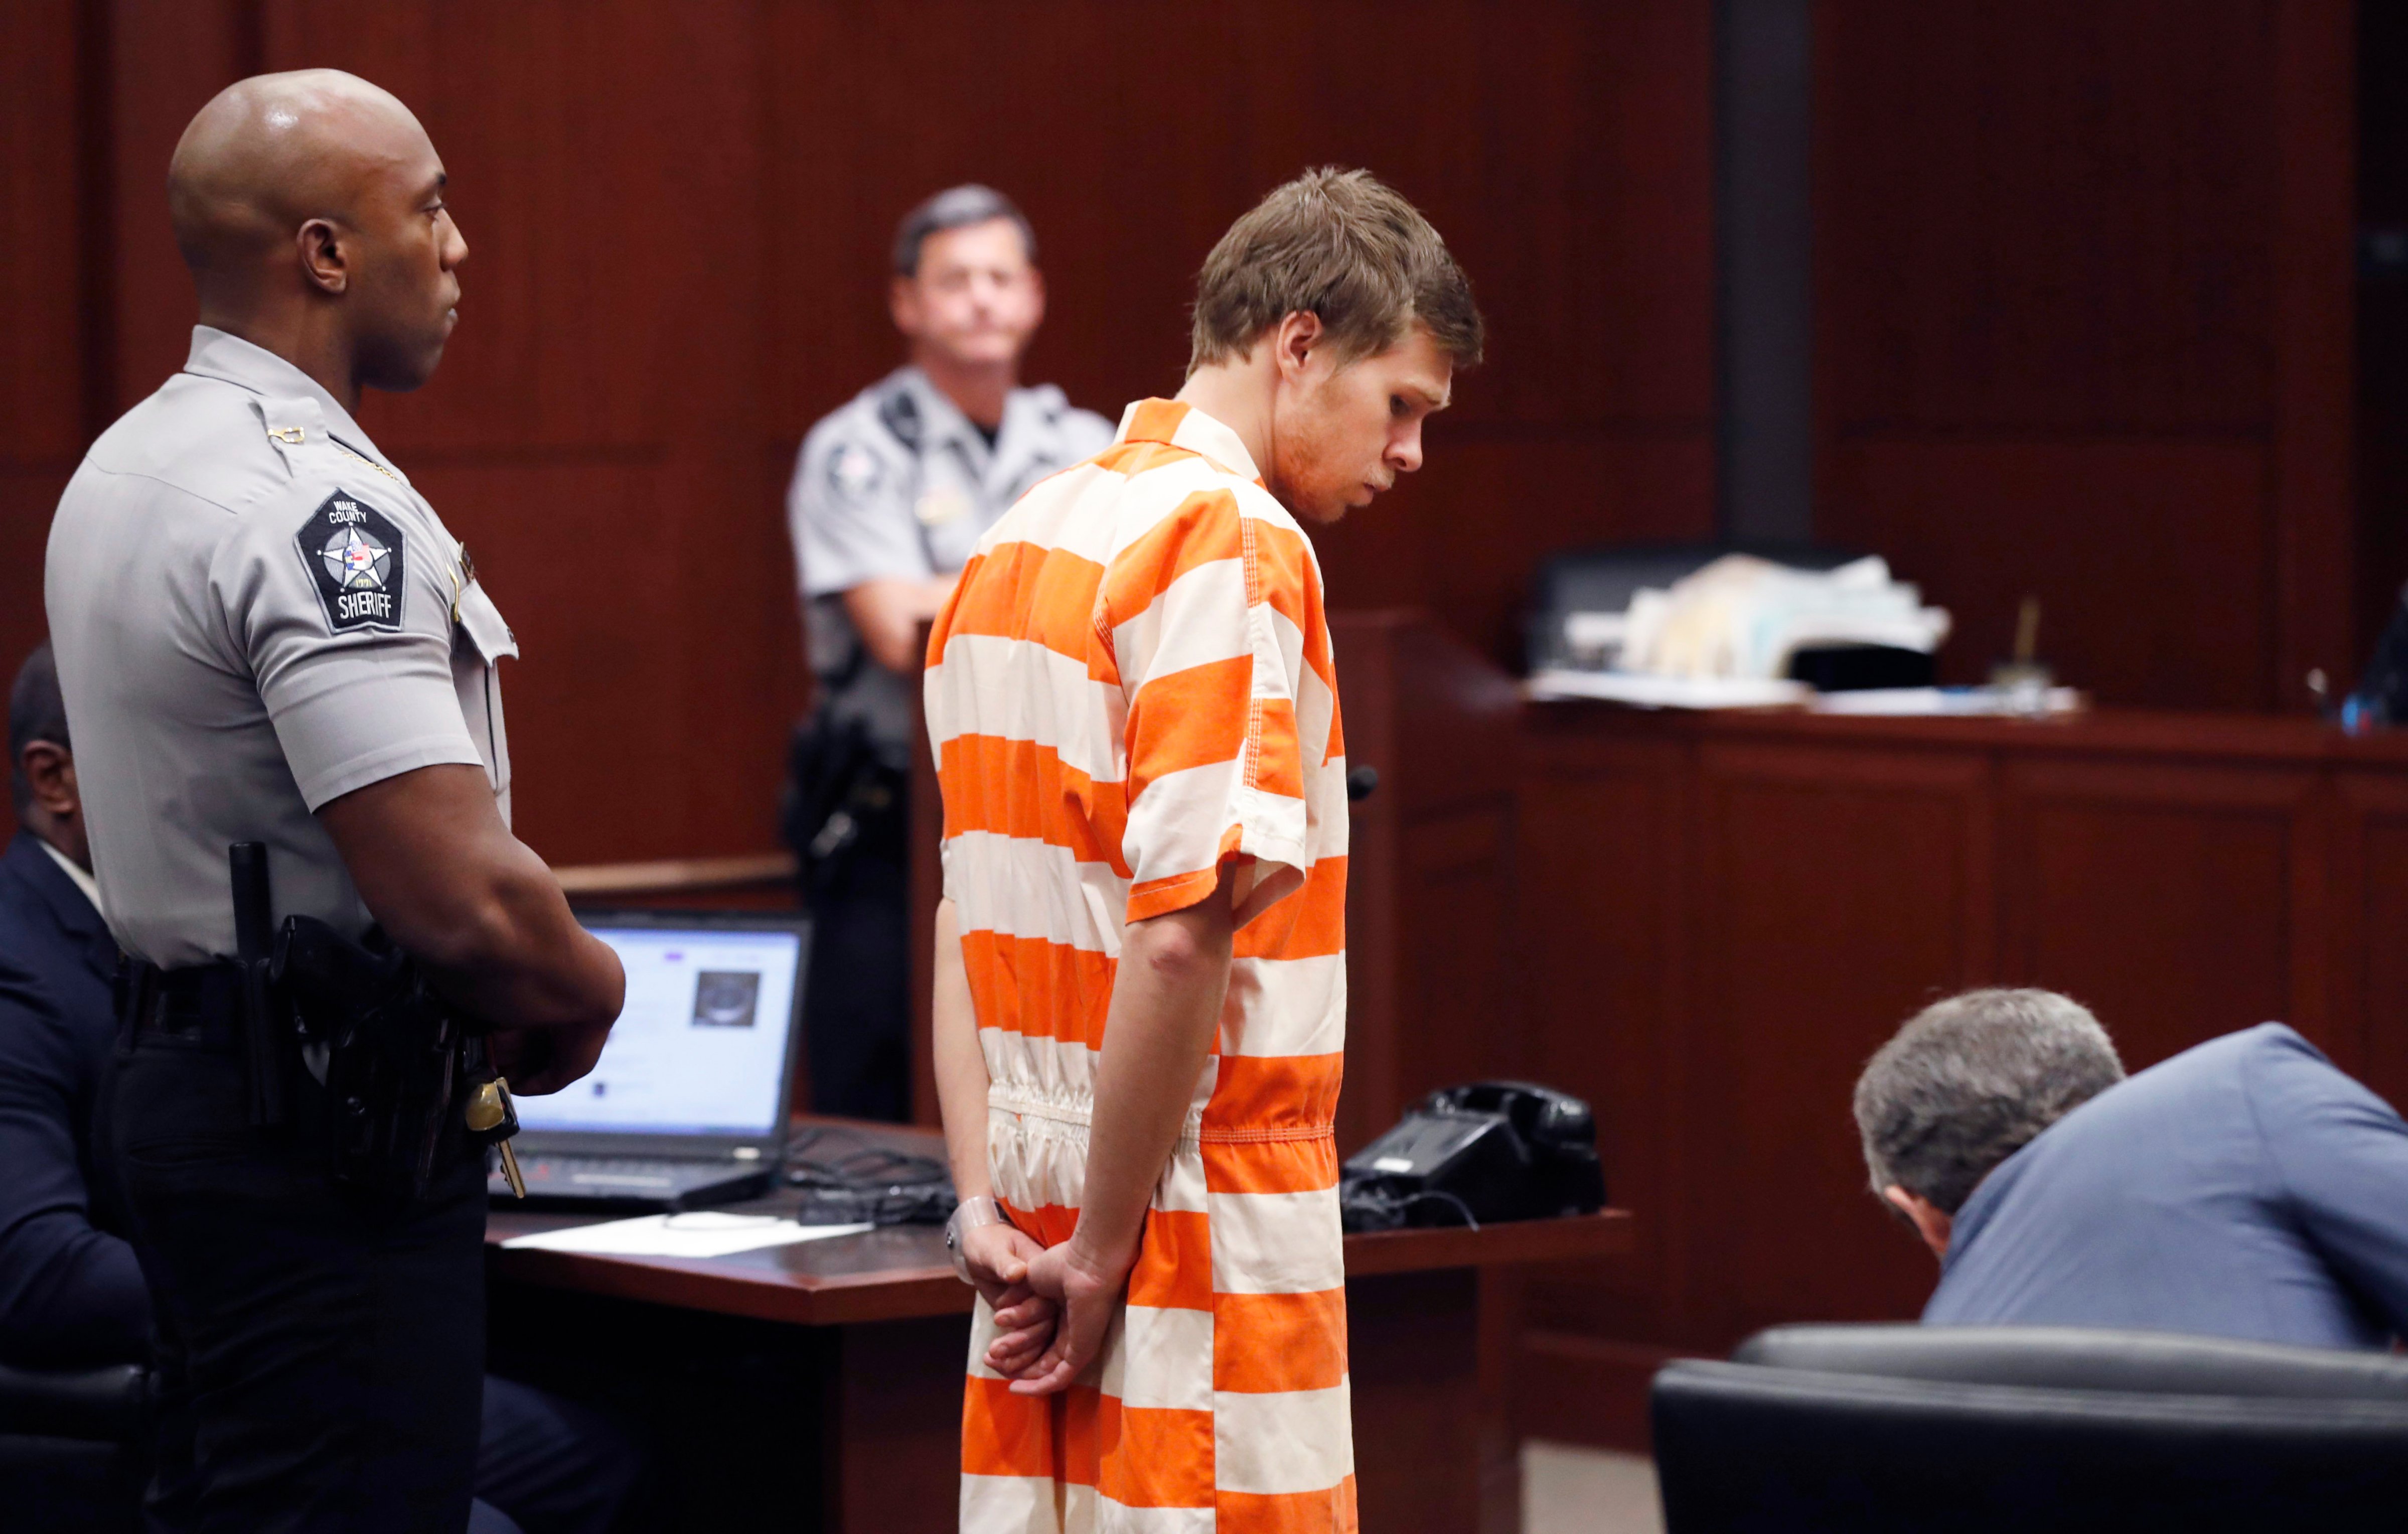 Matthew Phelps stands in the courtroom during his first appearance Tuesday, Sept. 5, 2017, in Raleigh, N.C. Phelps is charged in the death of his wife, Lauren Ashley-Nicole Phelps. (Ethan Hyman—The News &amp; Observer/AP)